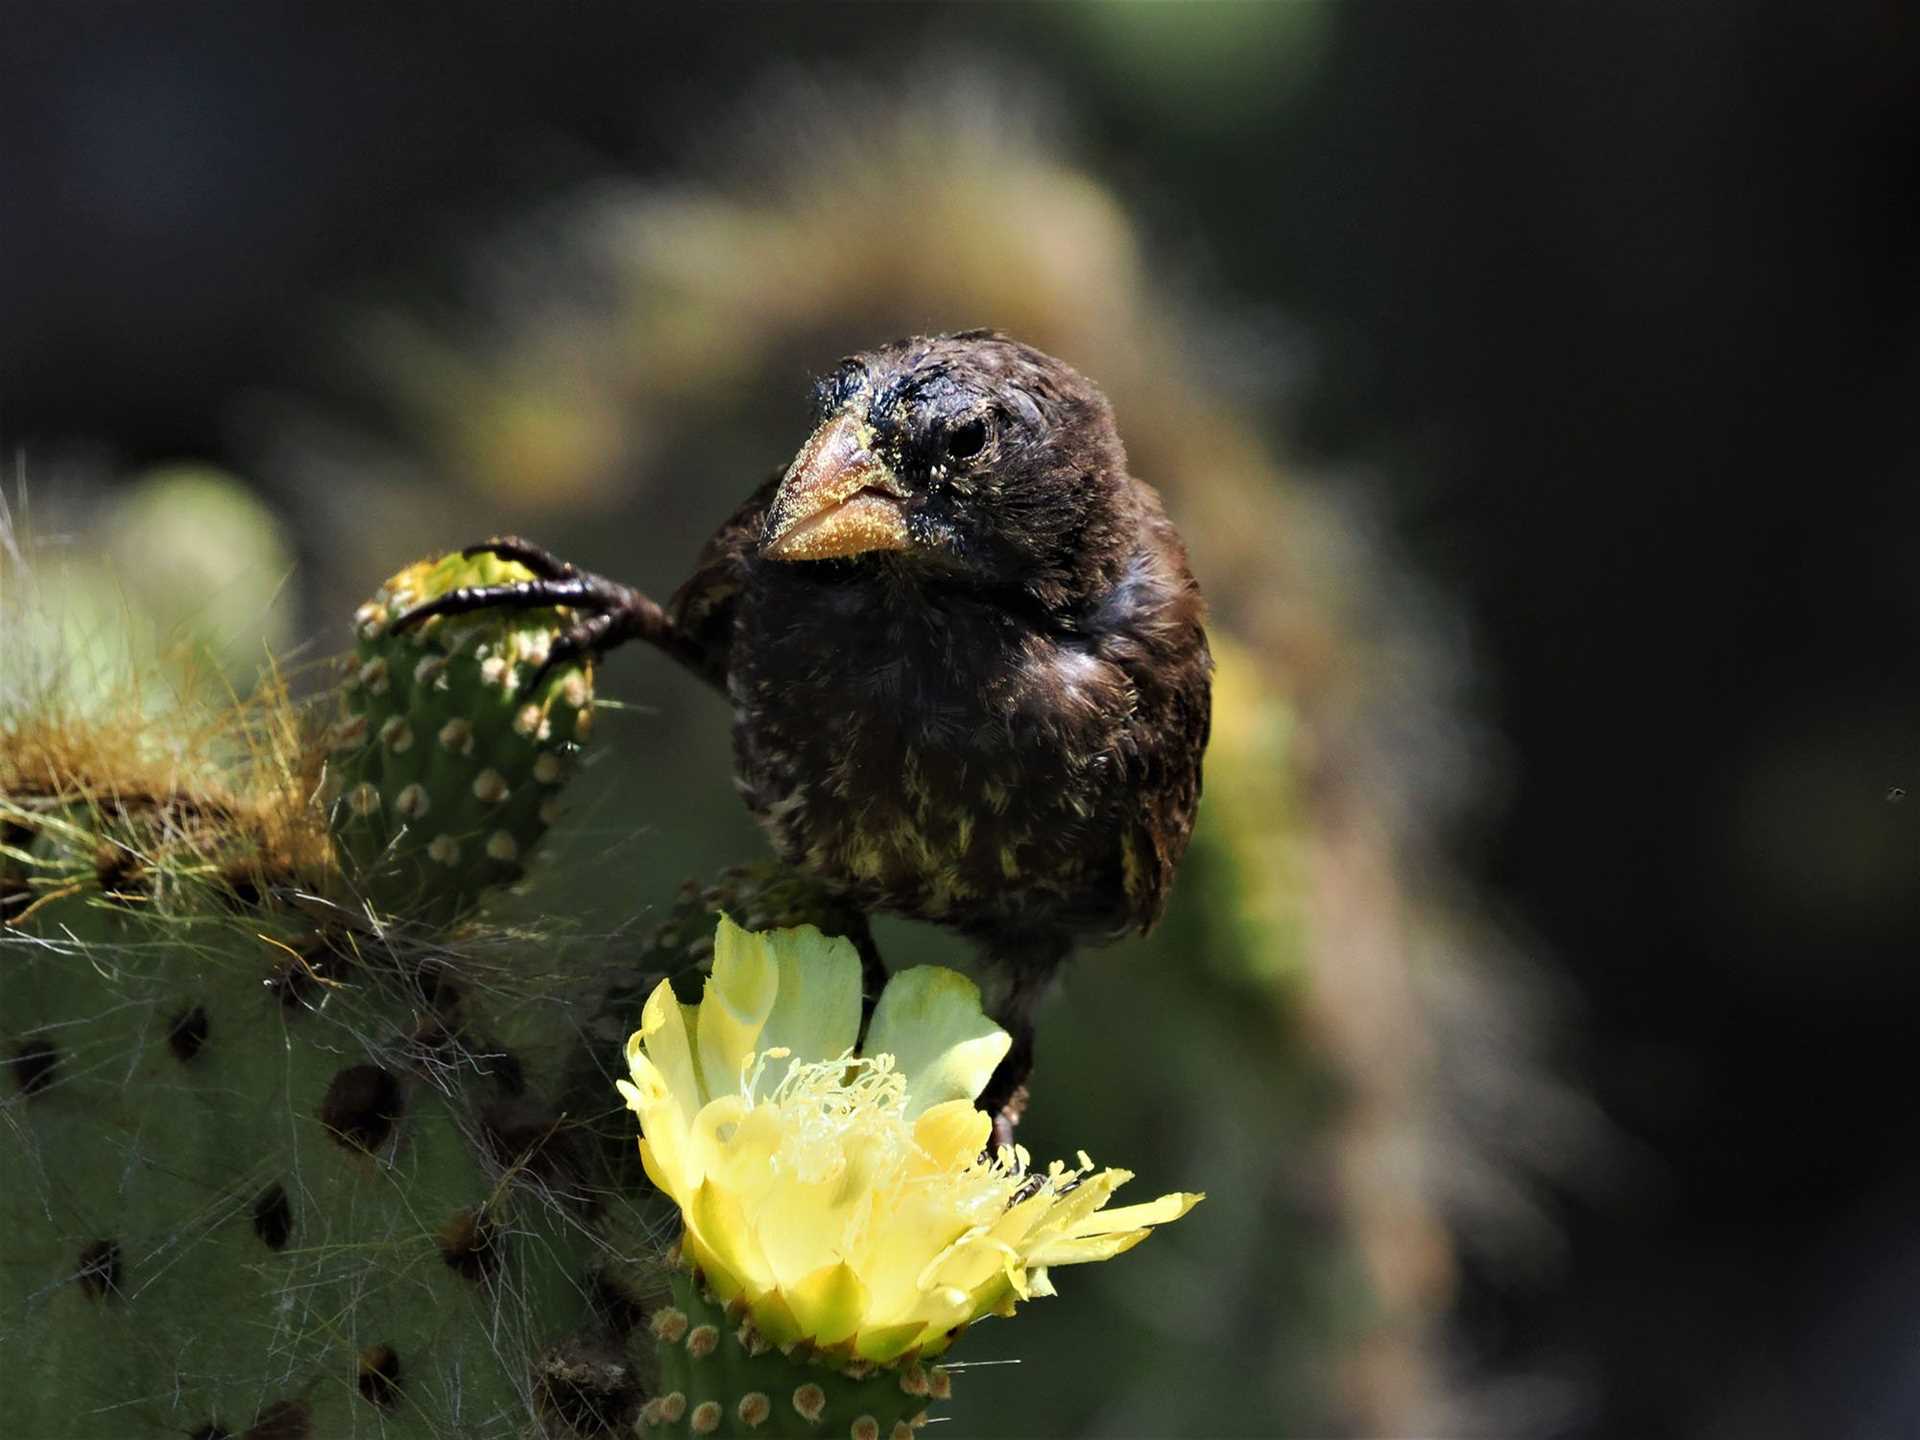 cactus finch on top of a cactus